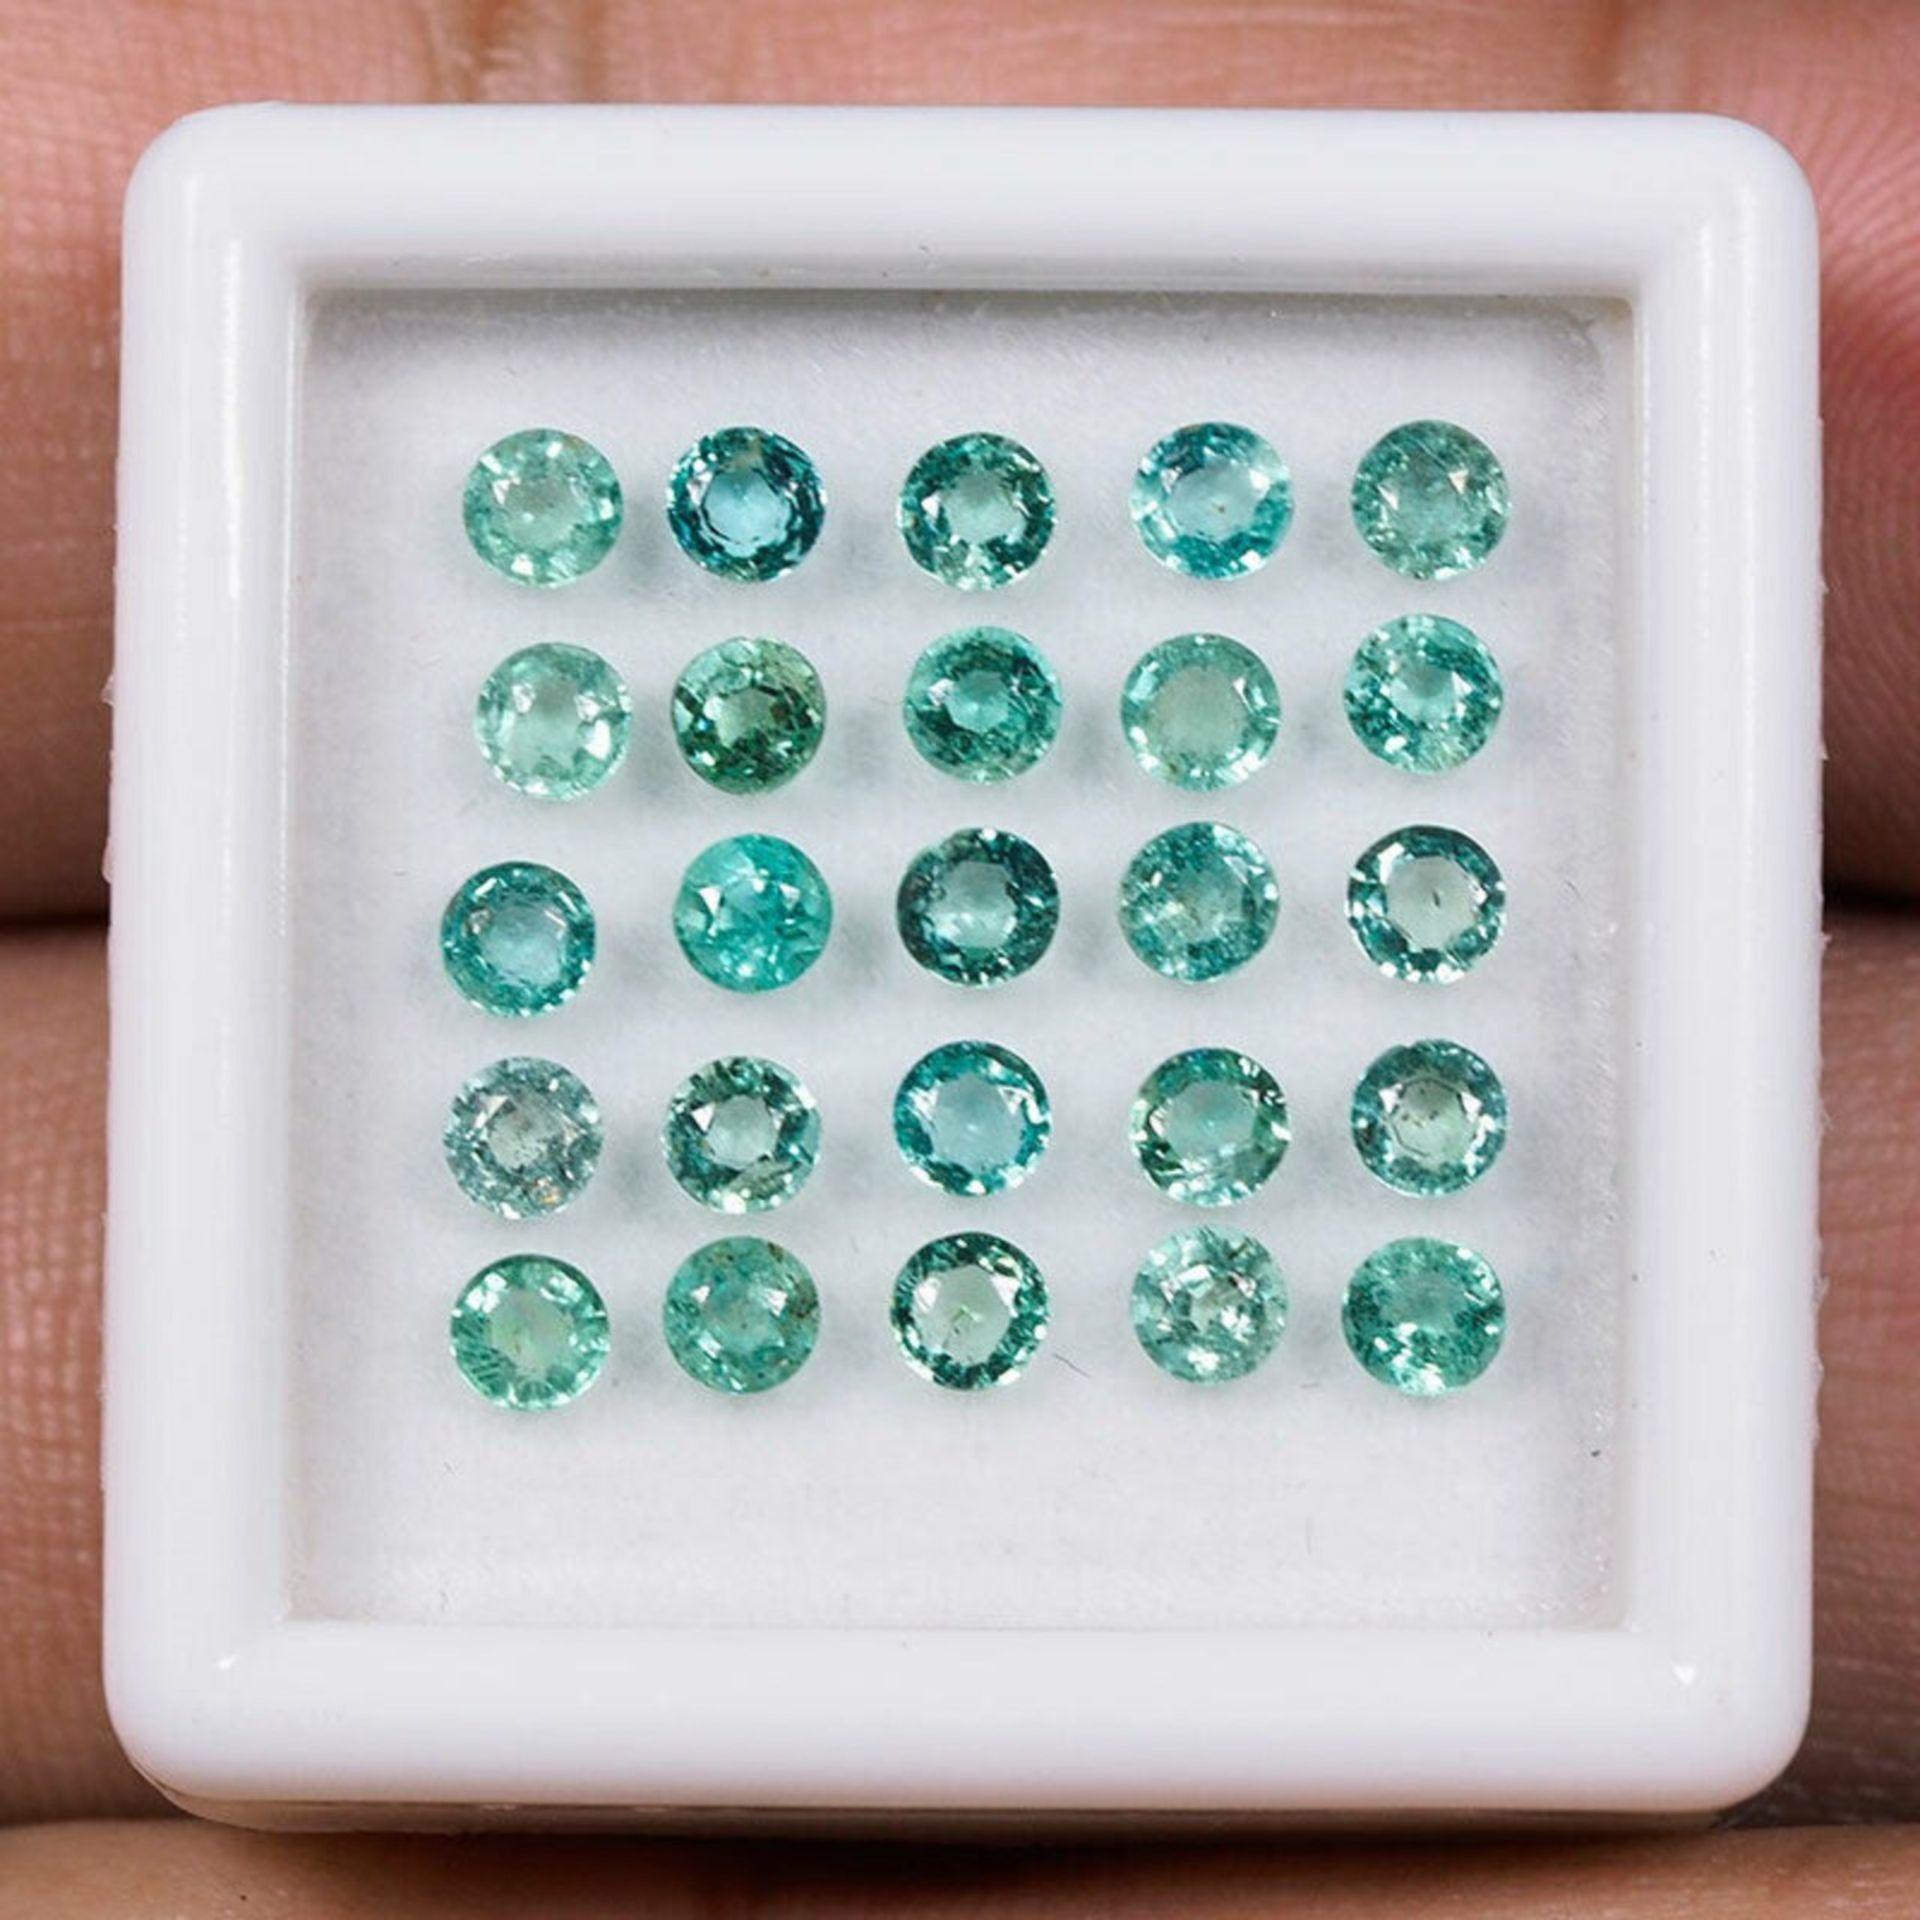 IGL&I Certified - Natural Colombian Emeralds - 16 Pieces - 1.64 Carats - Diamond round cut - Average